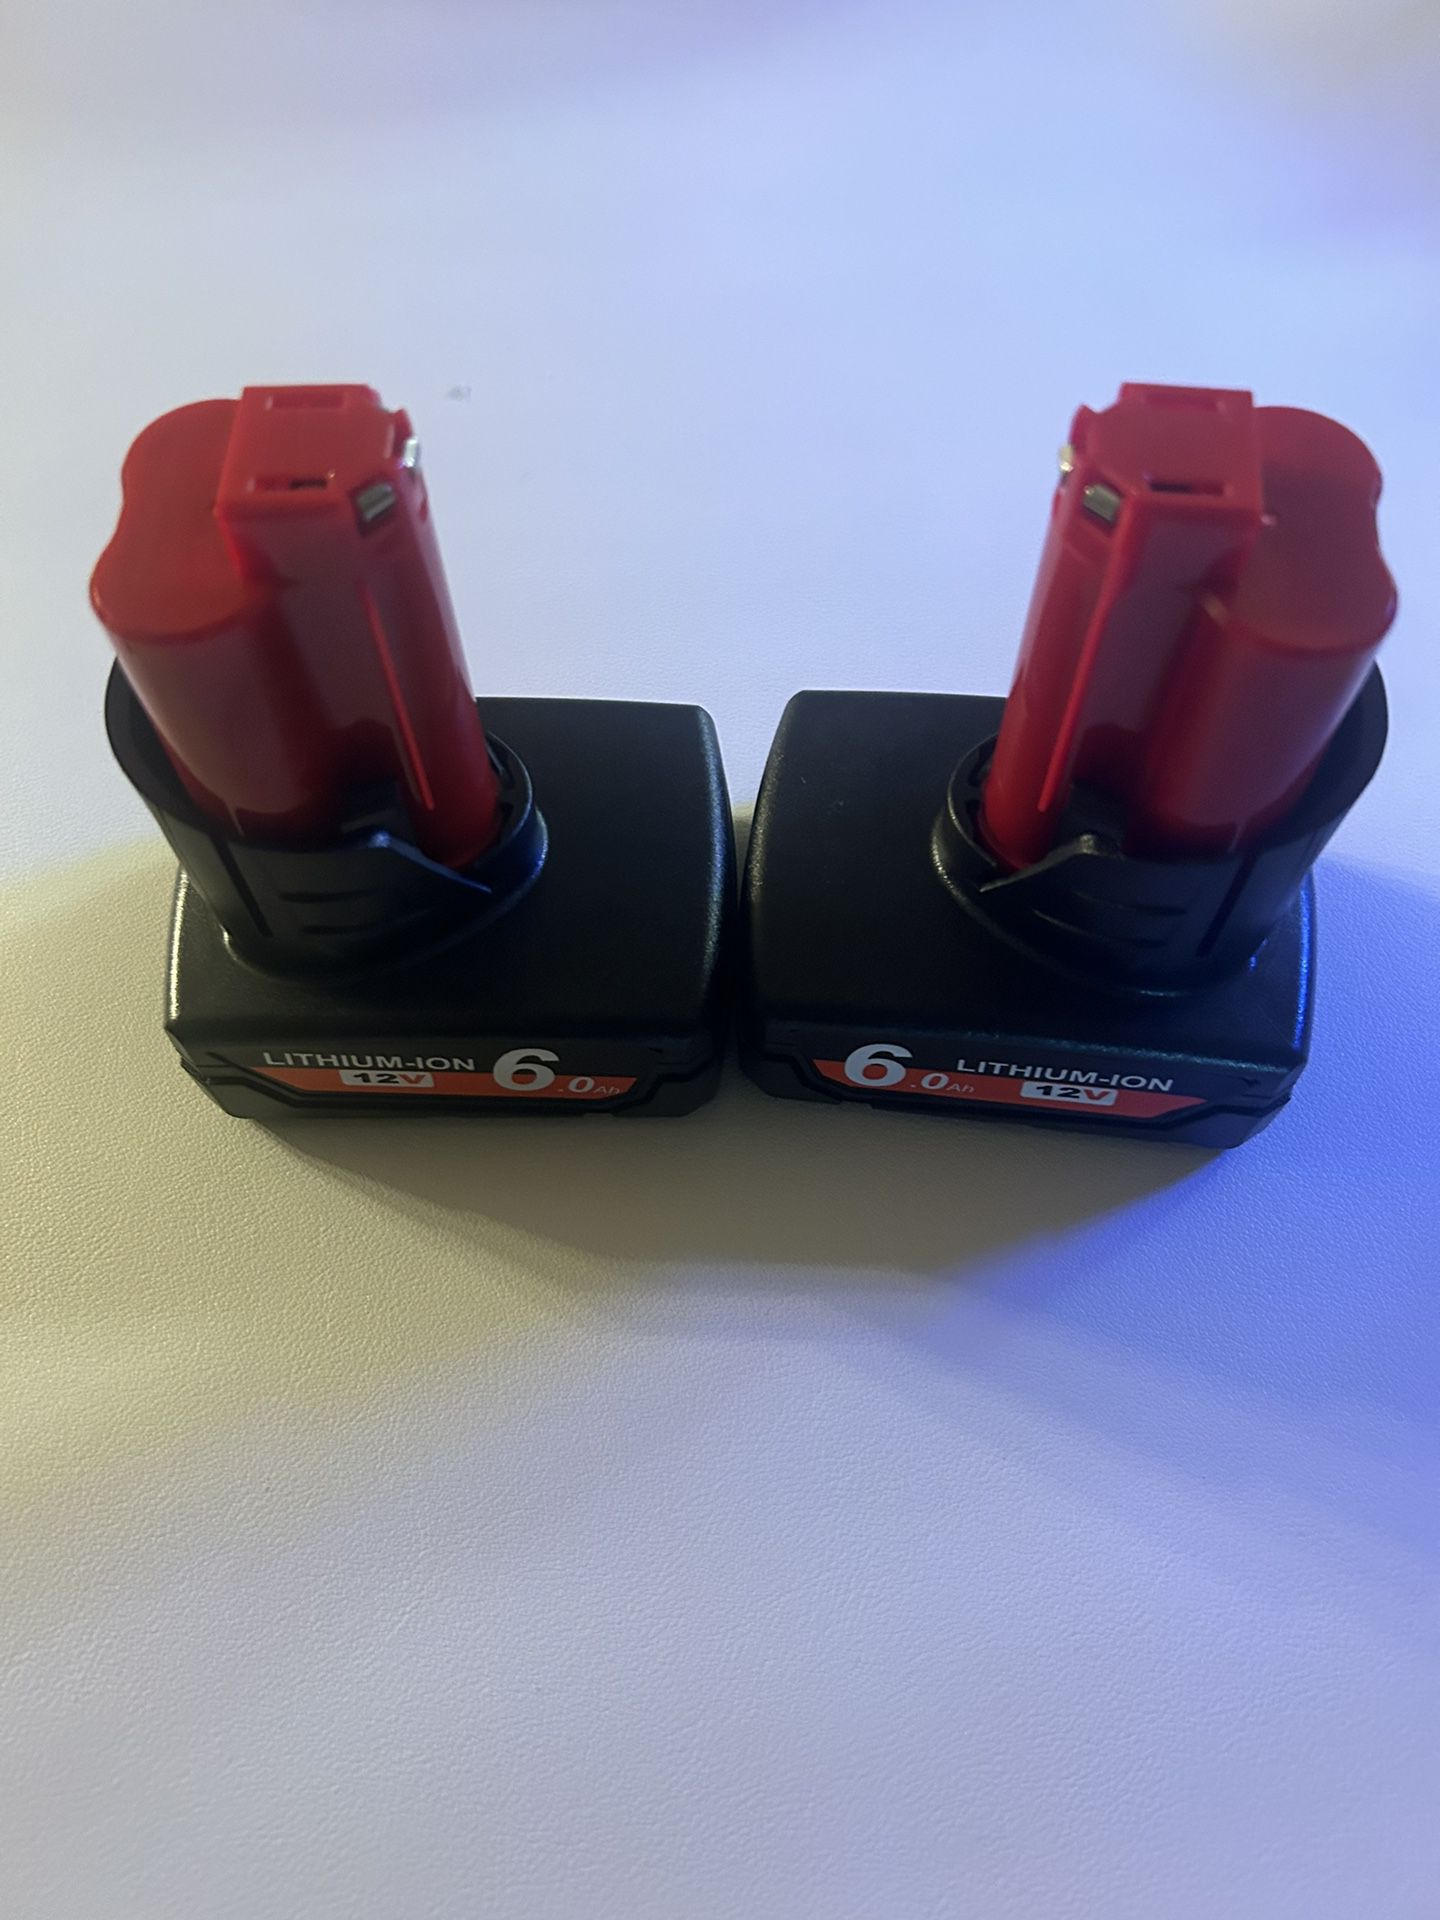 M12 Lithium Ion Batteries For Milwaukee 6Ah